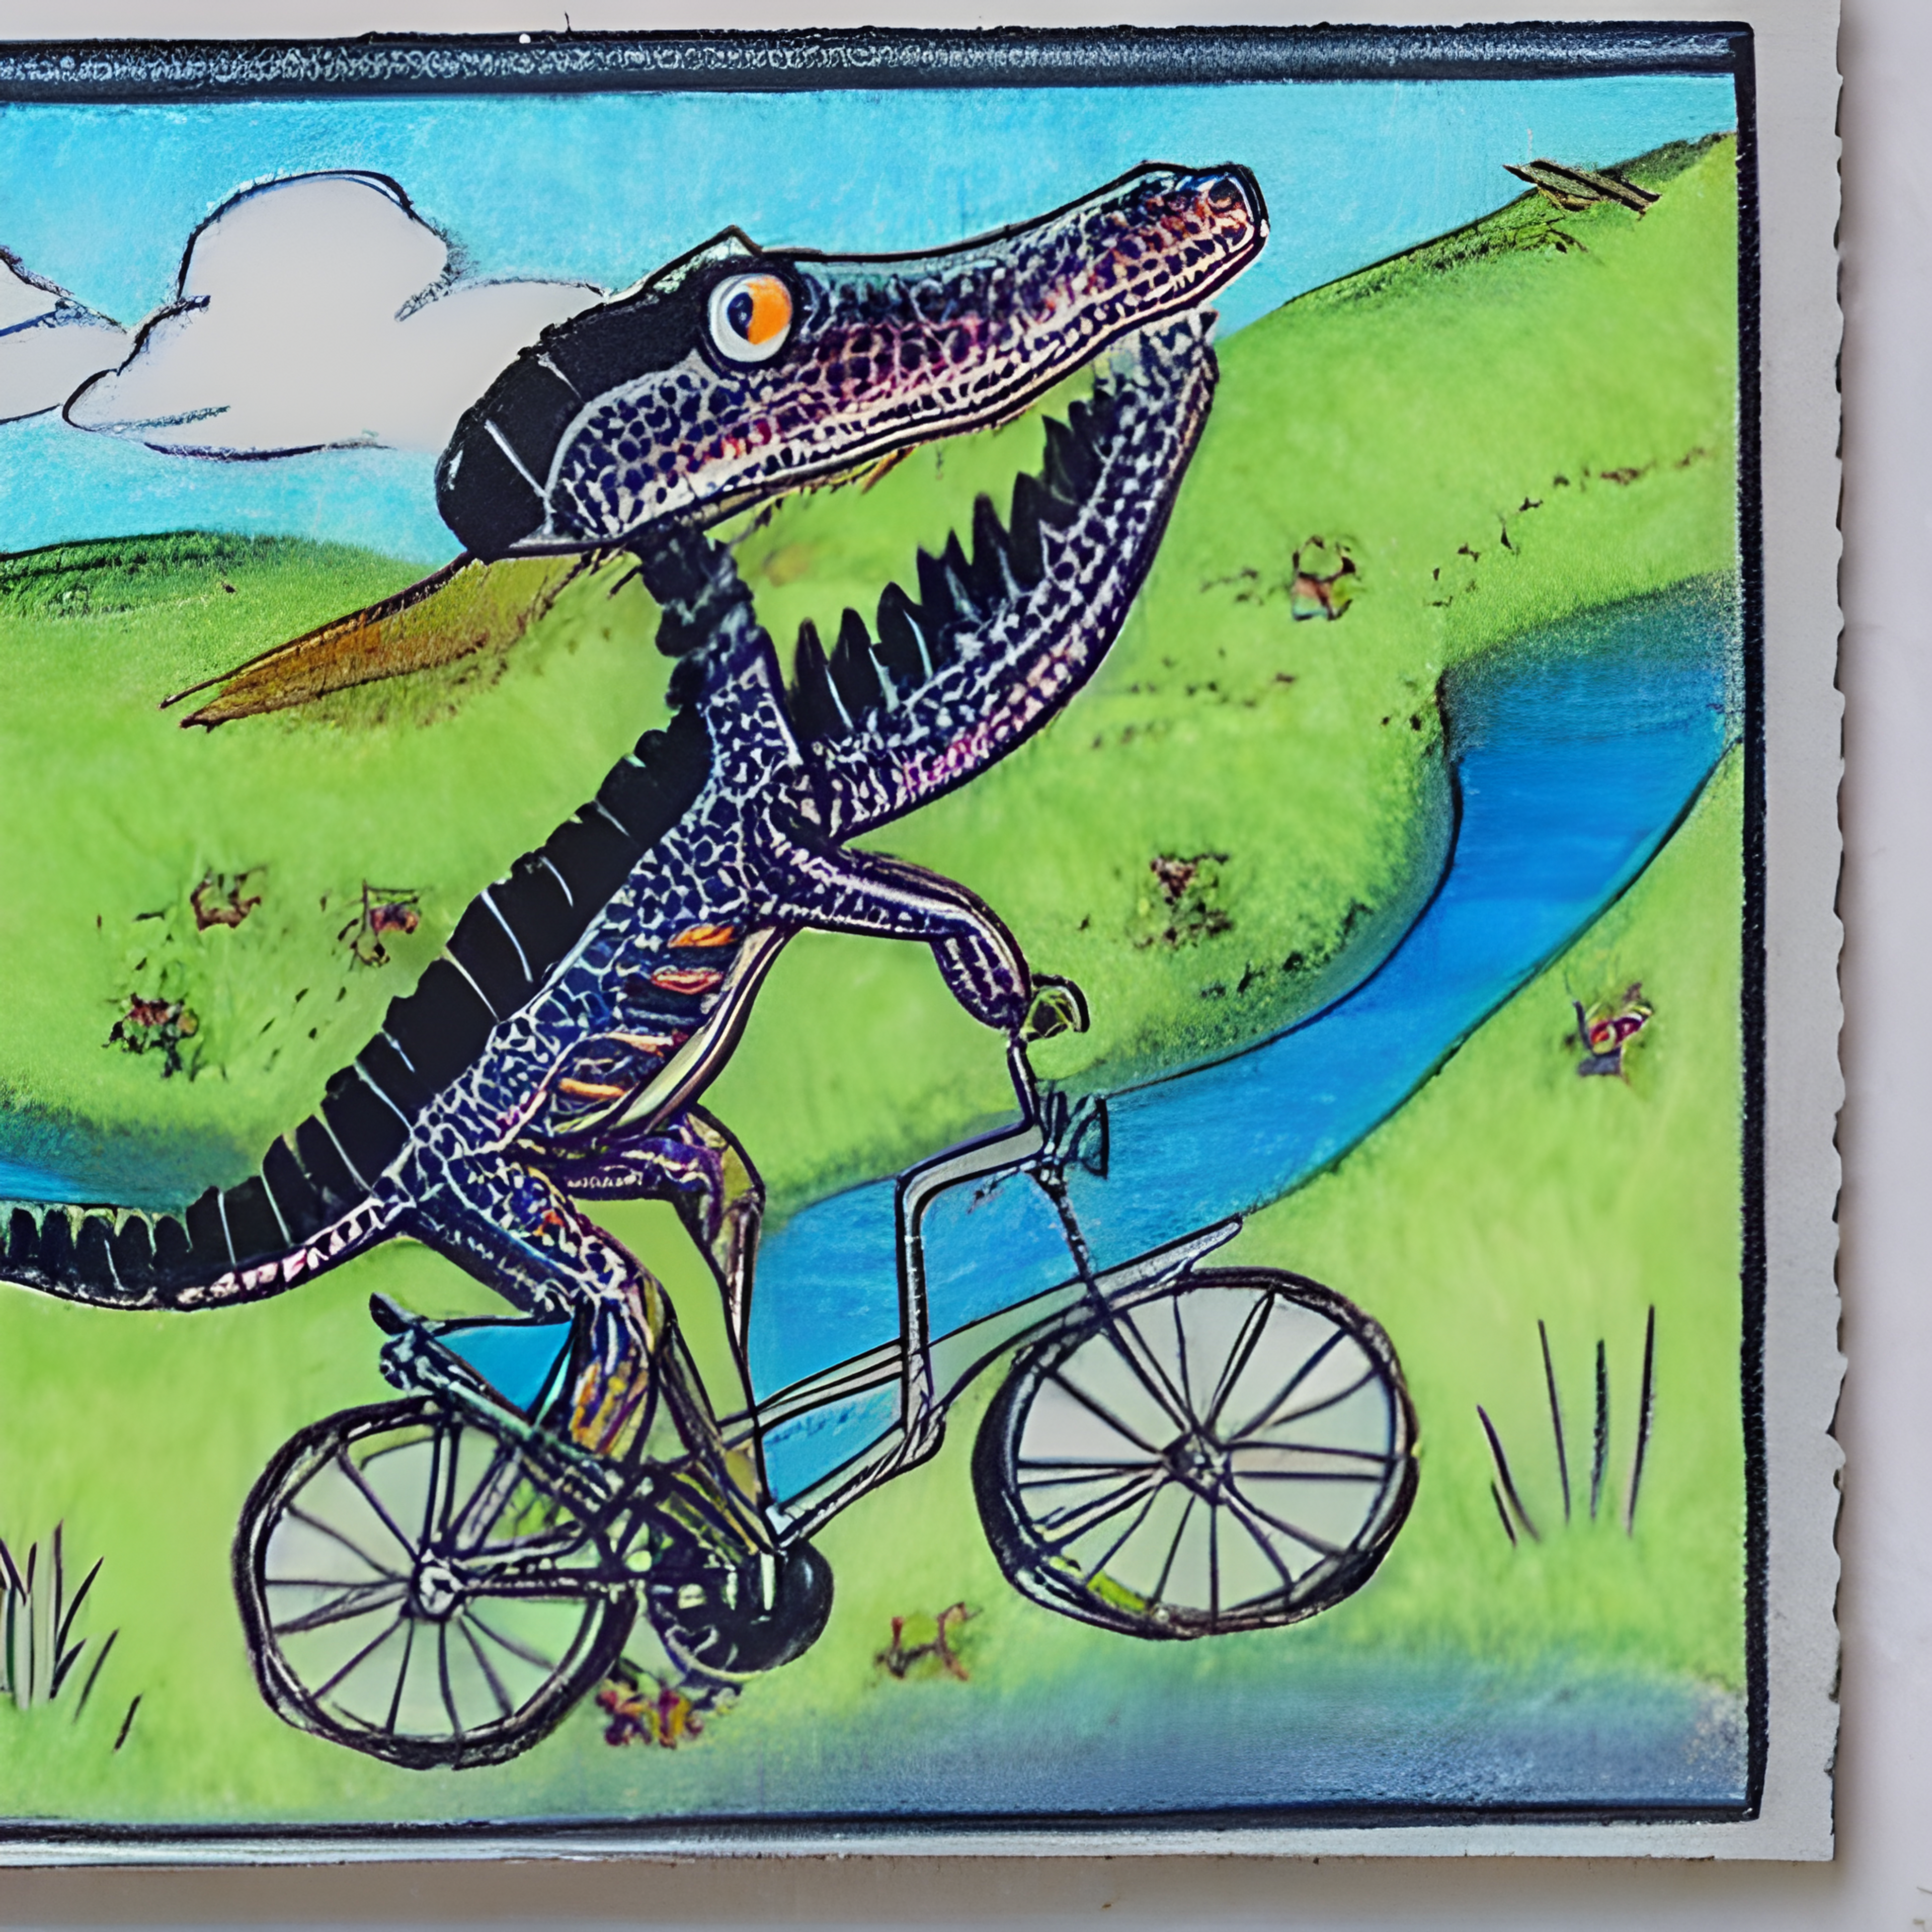 An illustration of a postcard depicting an alligator riding a bicycle